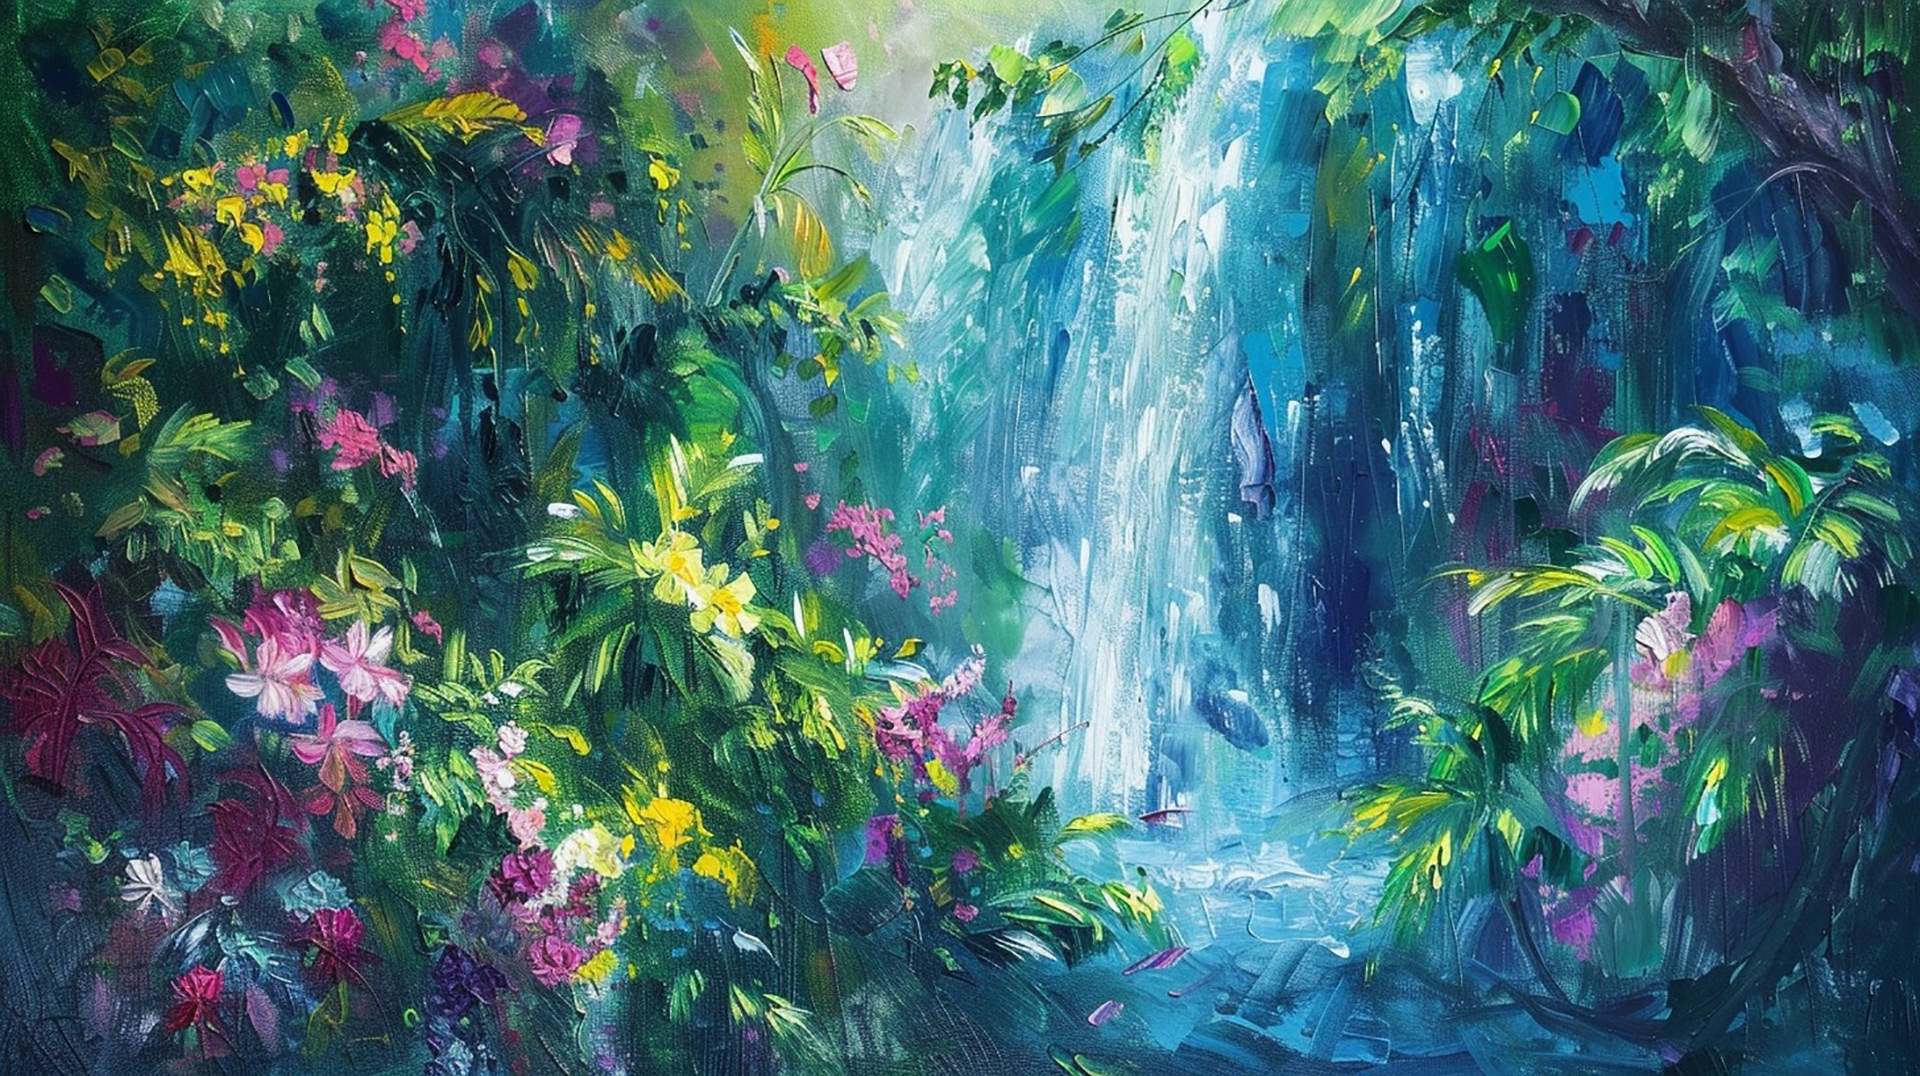 Brushstrokes of the Wild: Jungle Painting Wallpapers in HD